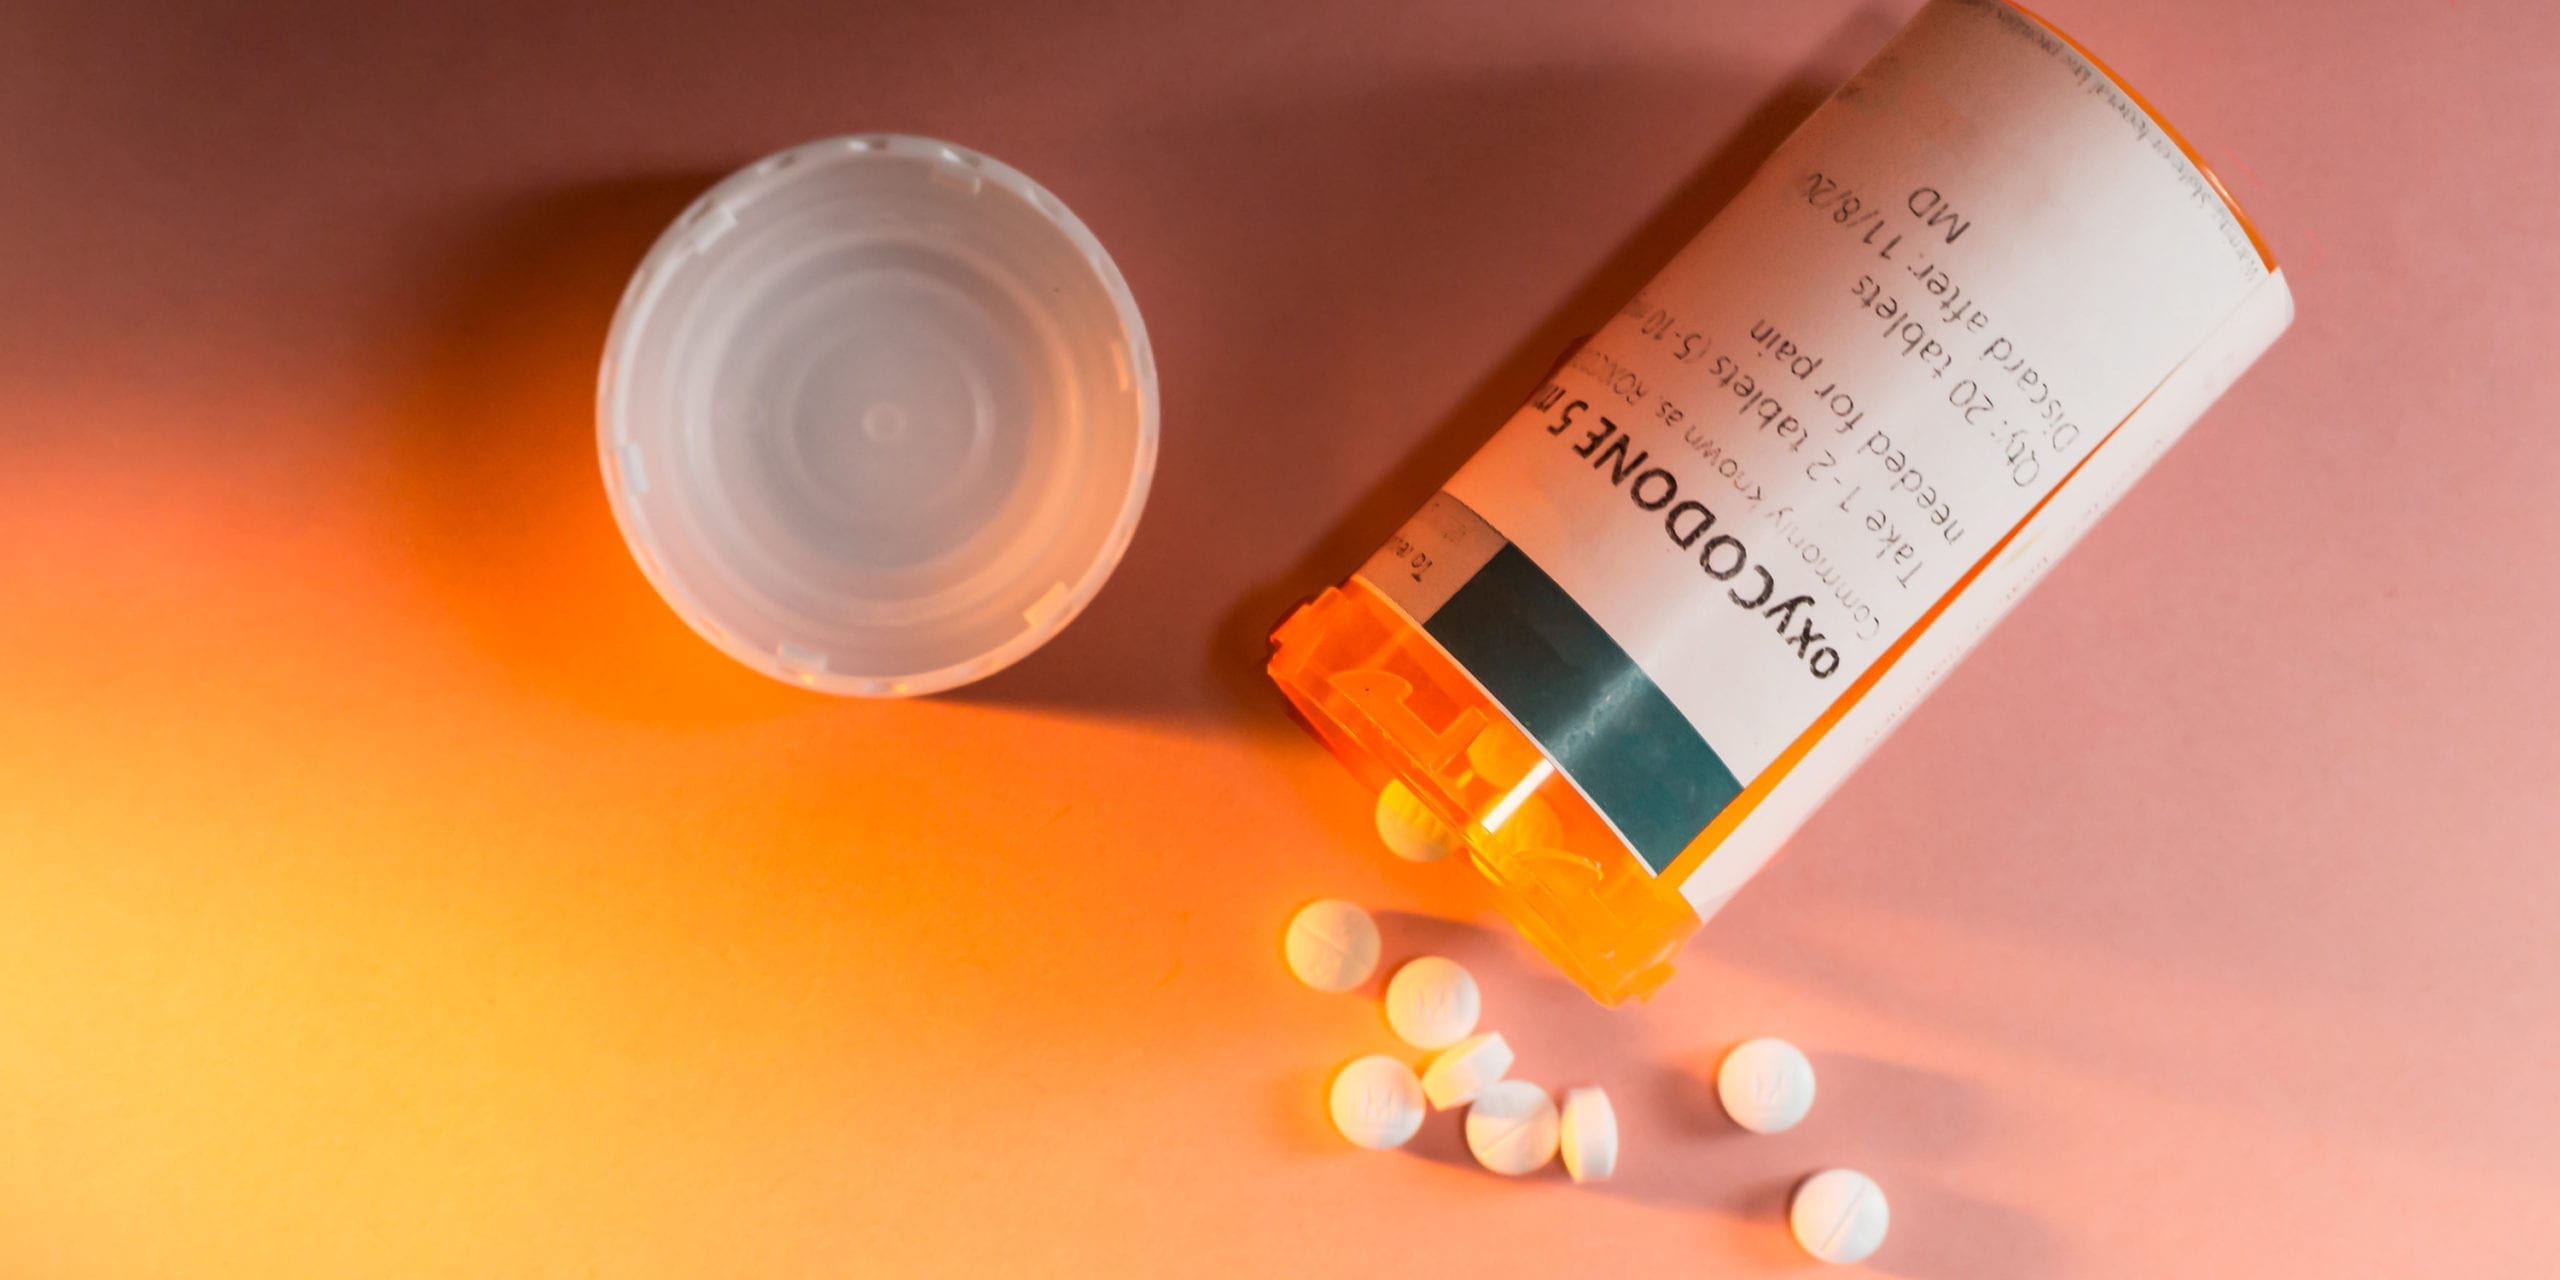 Oxycodone pills in a bottle. Oxycodone is an opioid painkiller. Photo by Cindy Shelby.